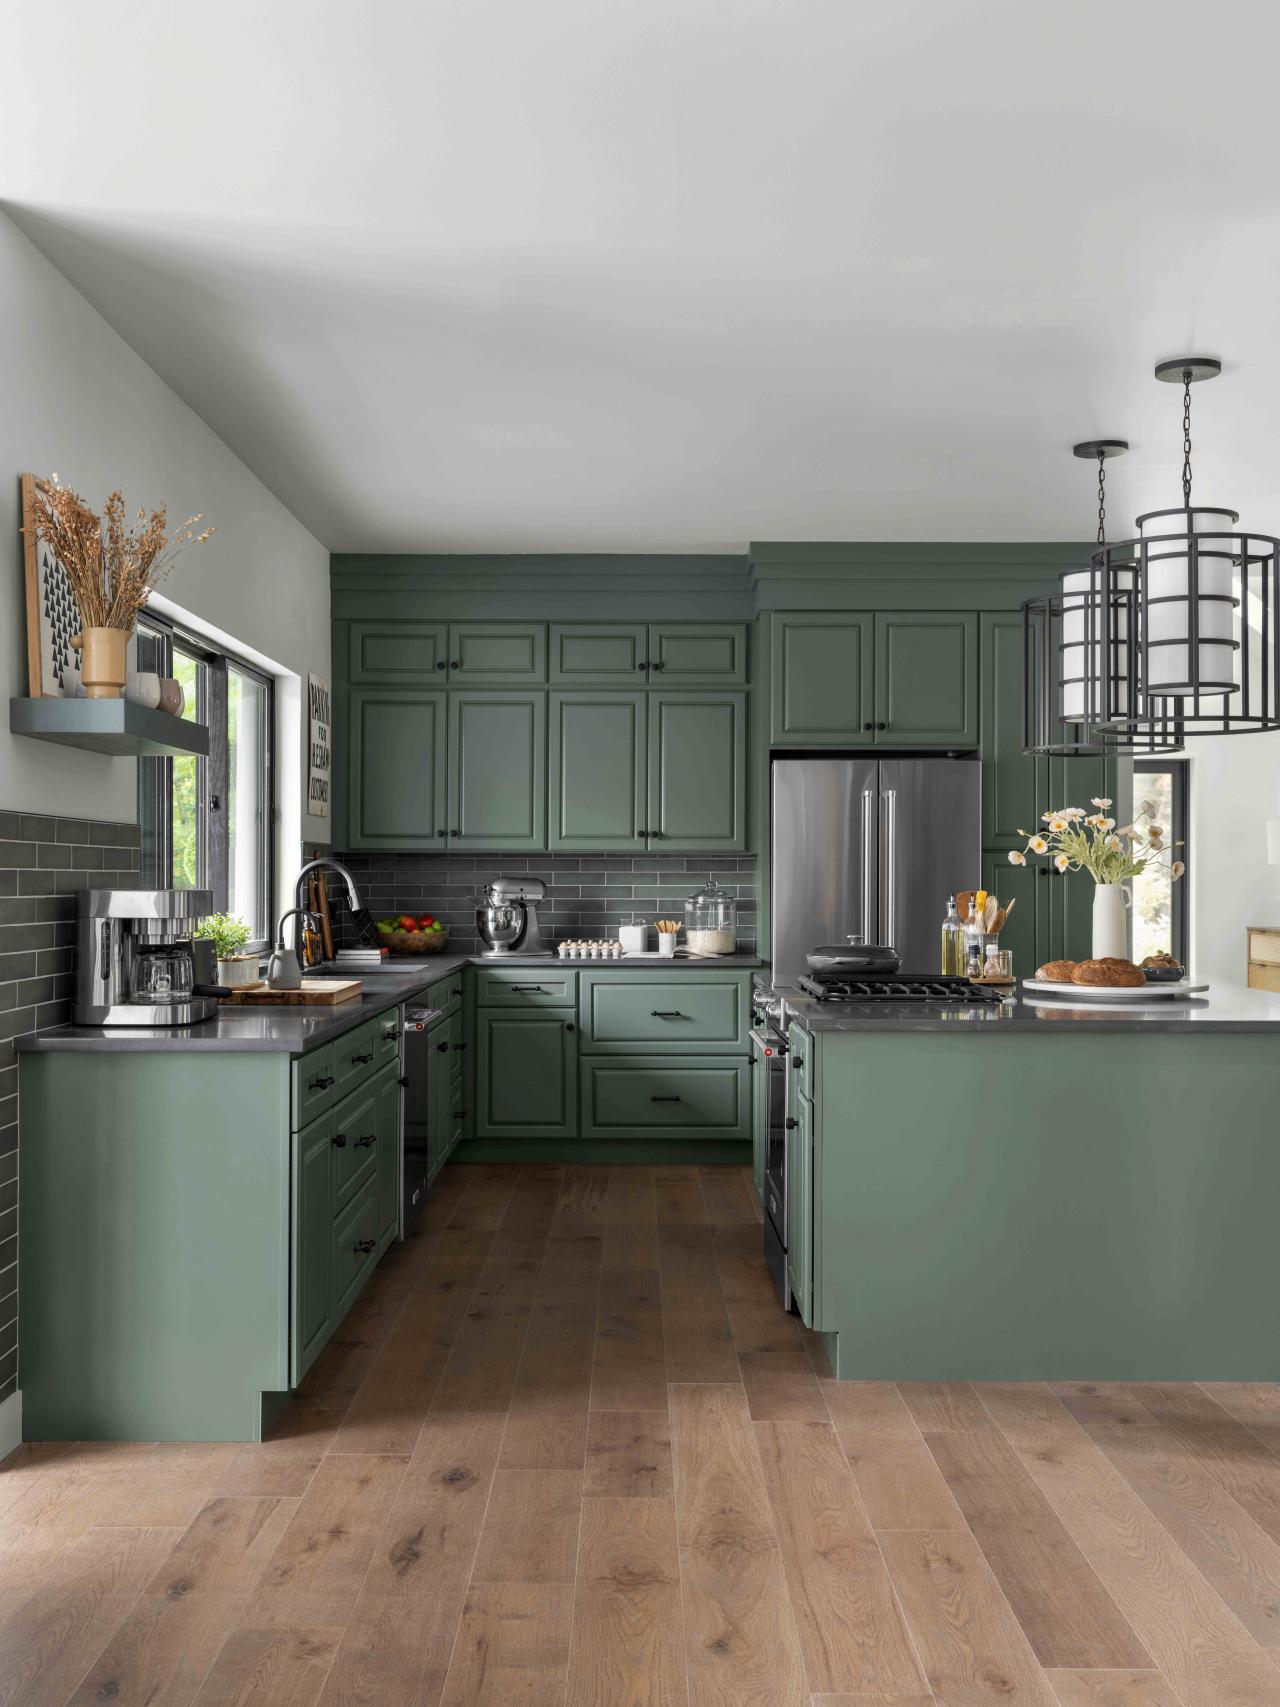 Painting Kitchen Appliances: Pictures & Ideas From HGTV